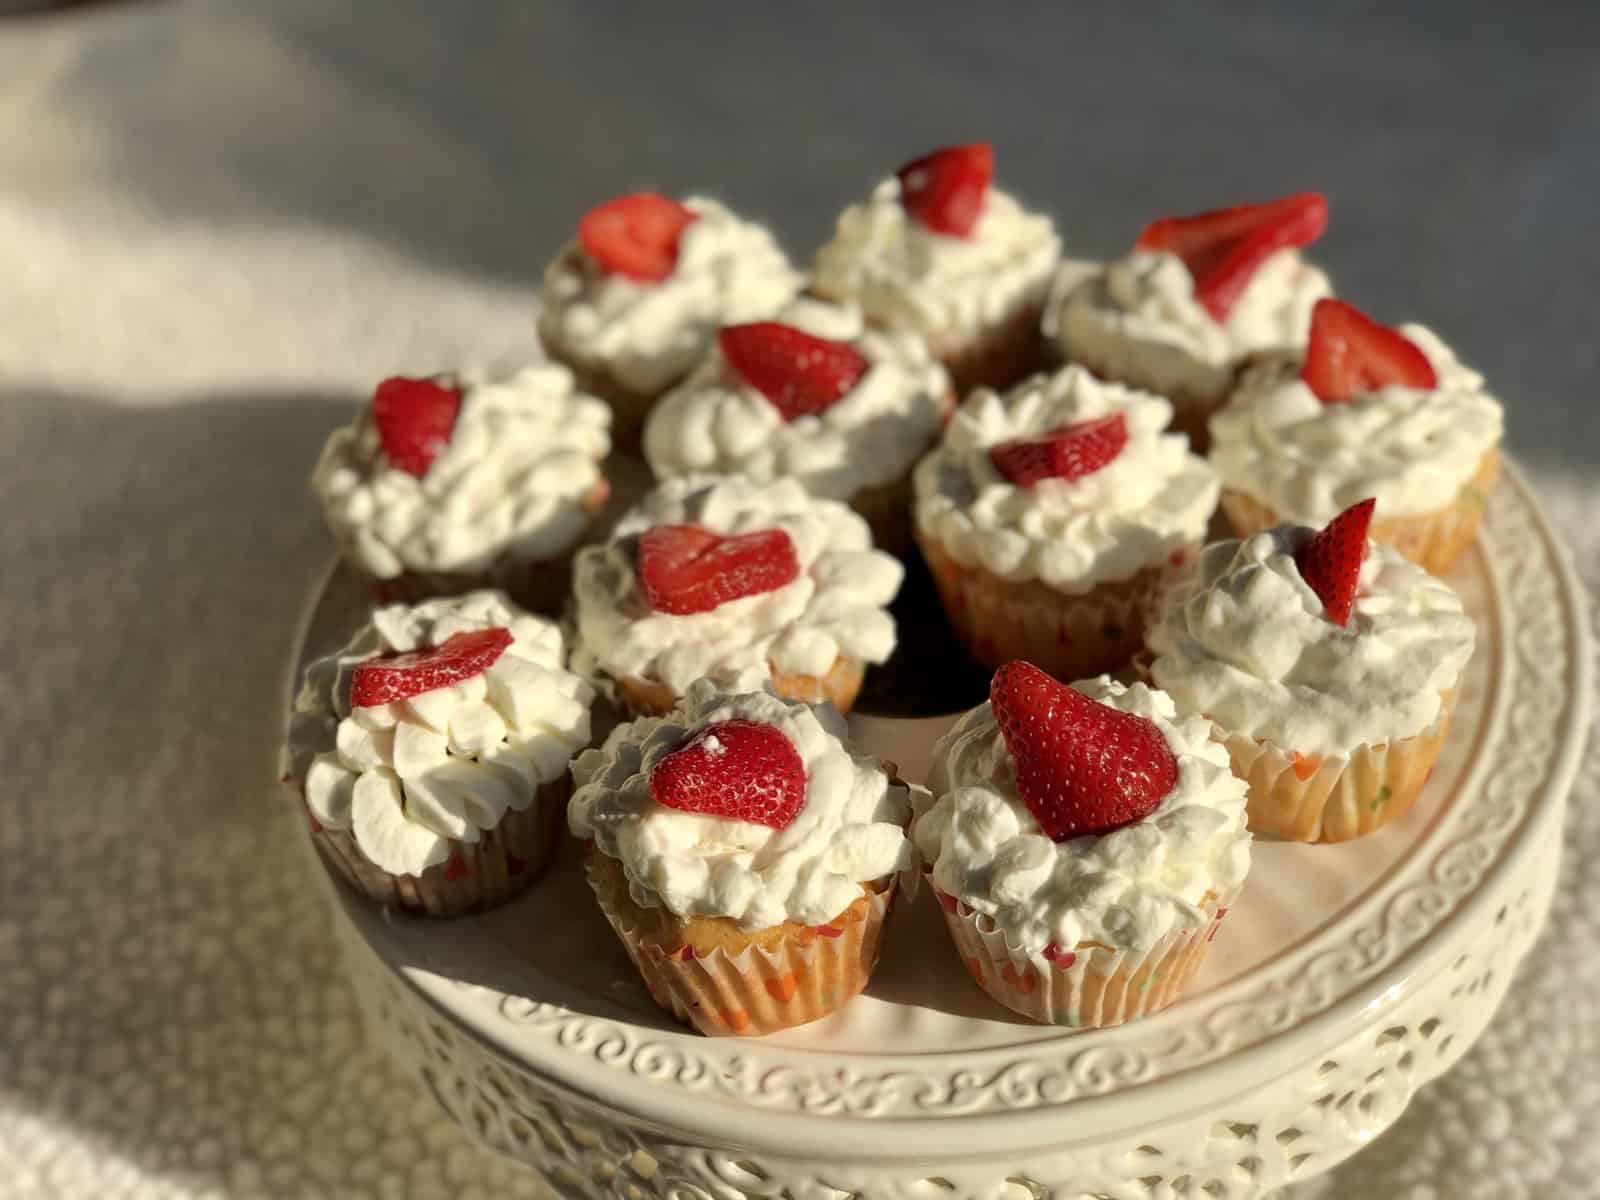 Strawberry Shortcake Cupcakes with Sweetened Whipped Cream